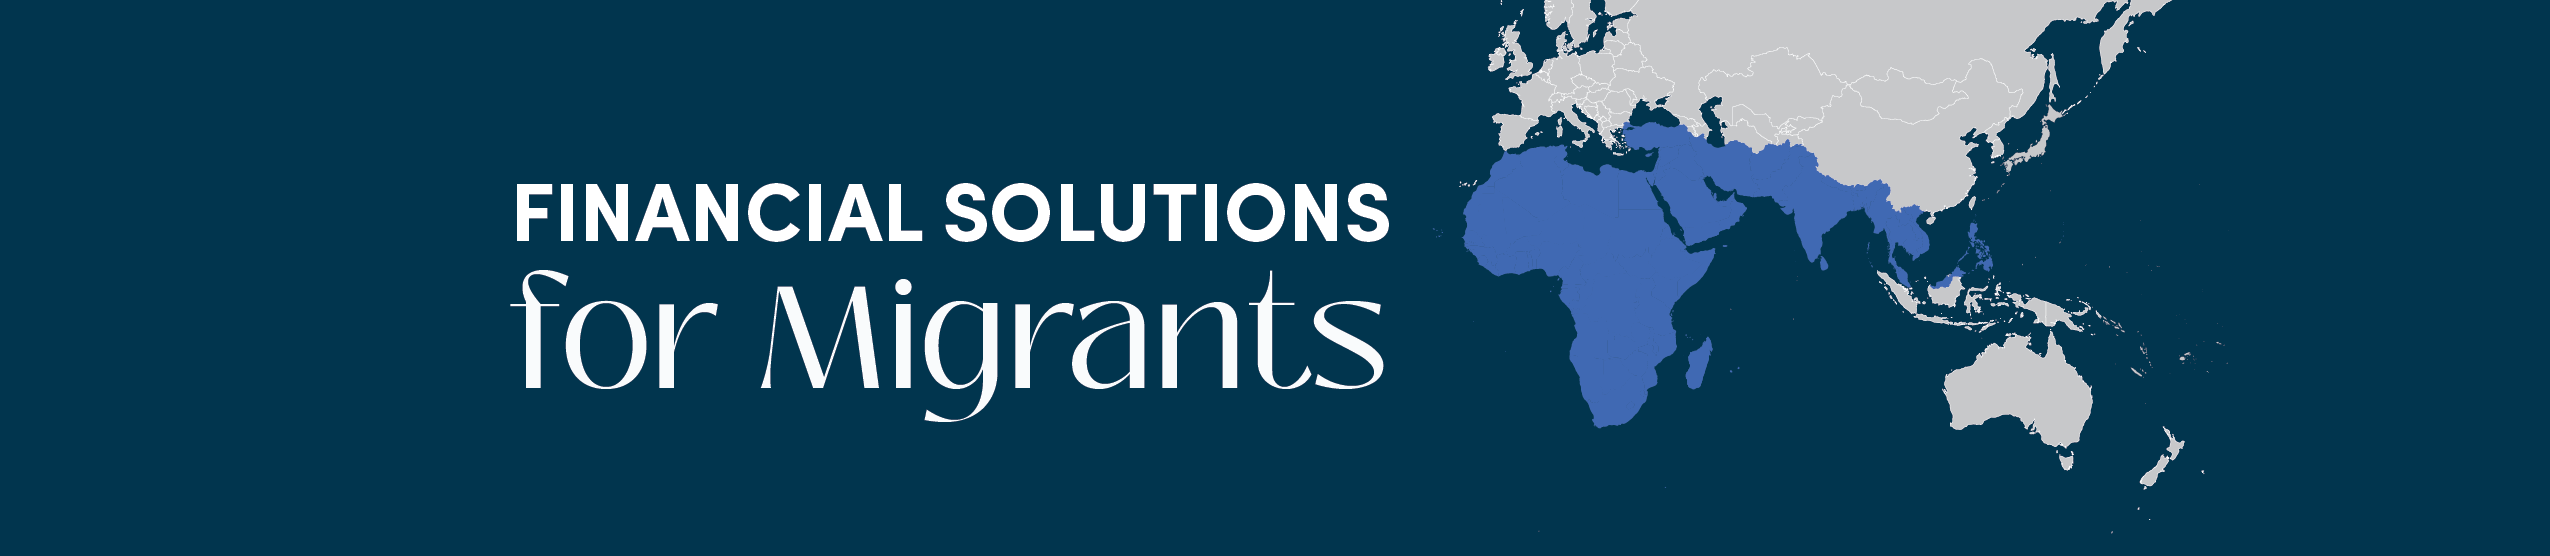 Financial Solutions for Migrants for document